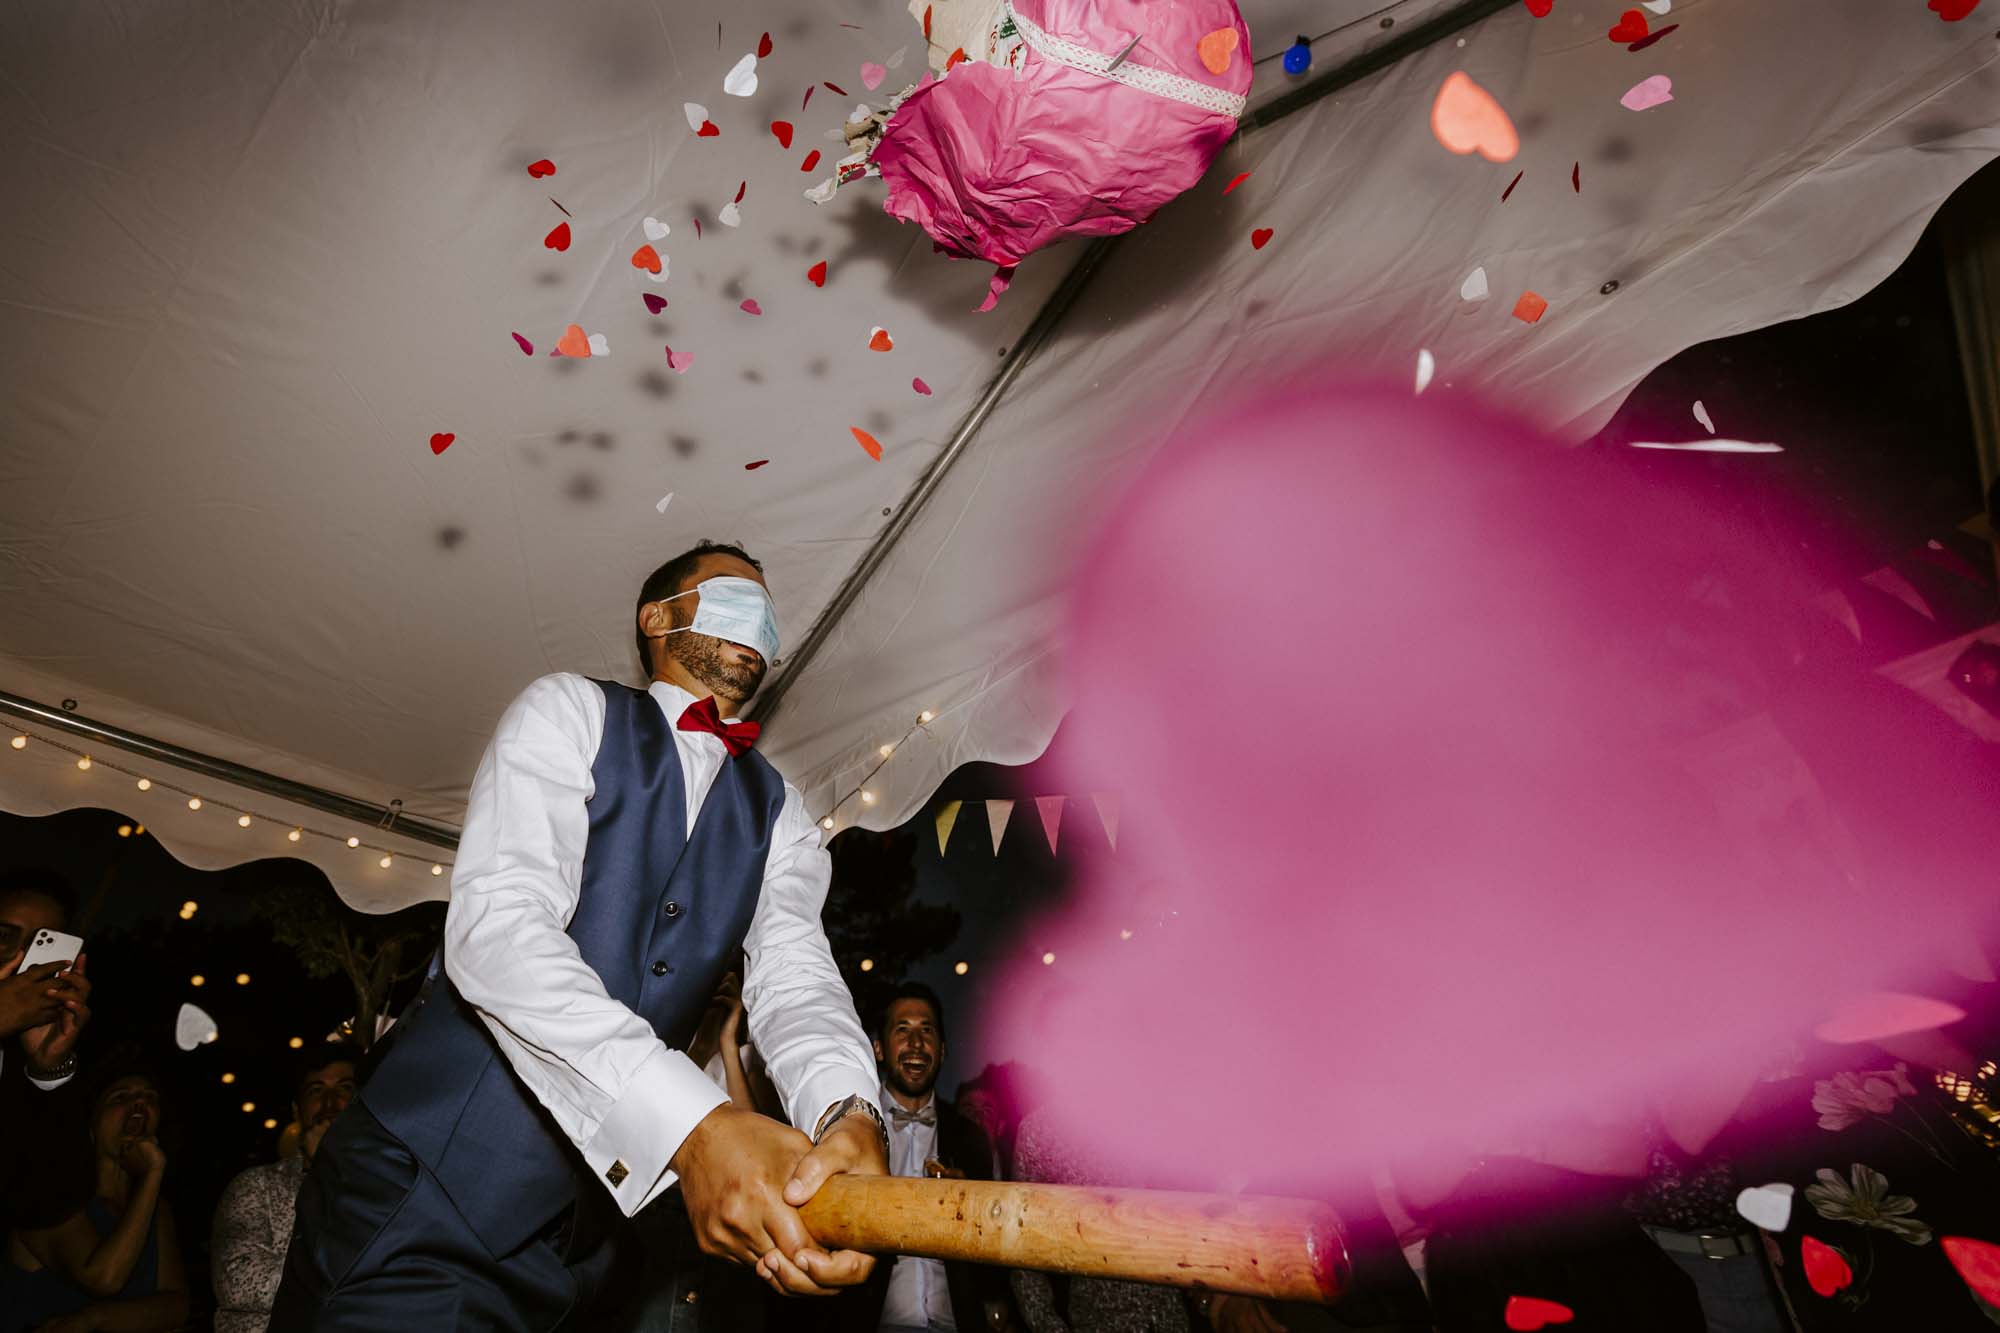 Bordeaux wedding photographer: the groom manages to hit the piñata, and lots of little paper hearts come out of it